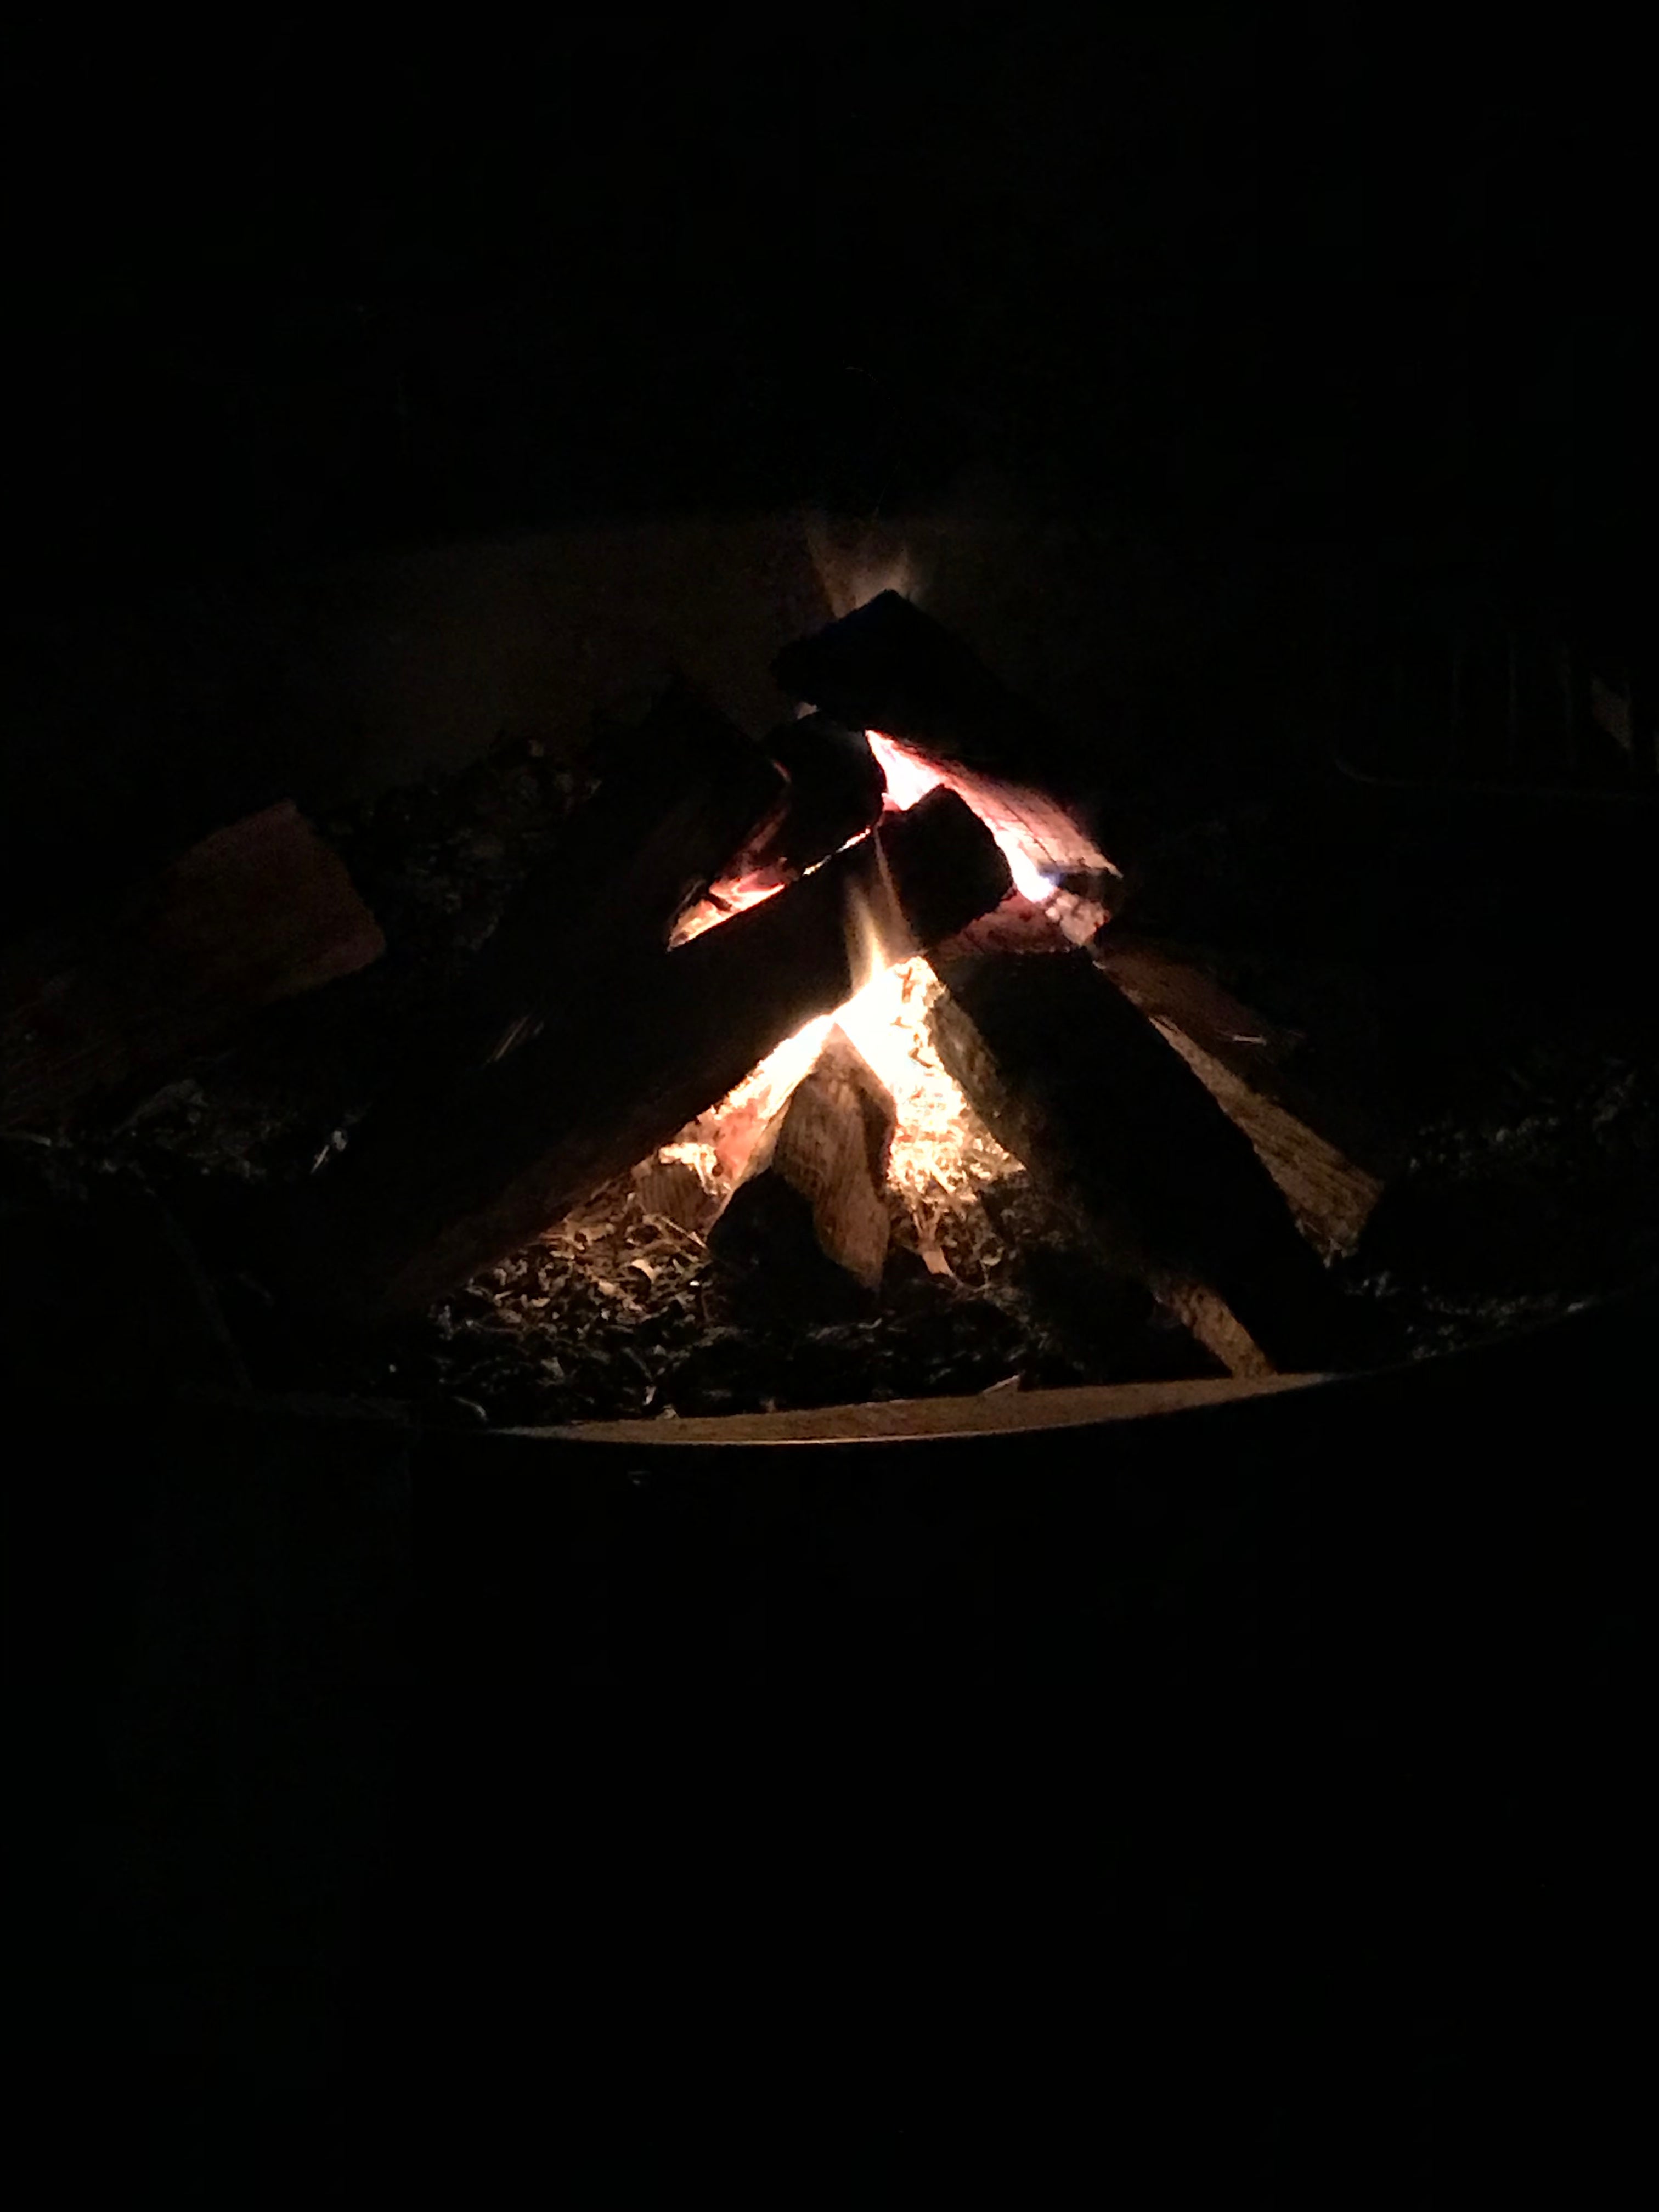 Warm campfire in a cold spring night. 